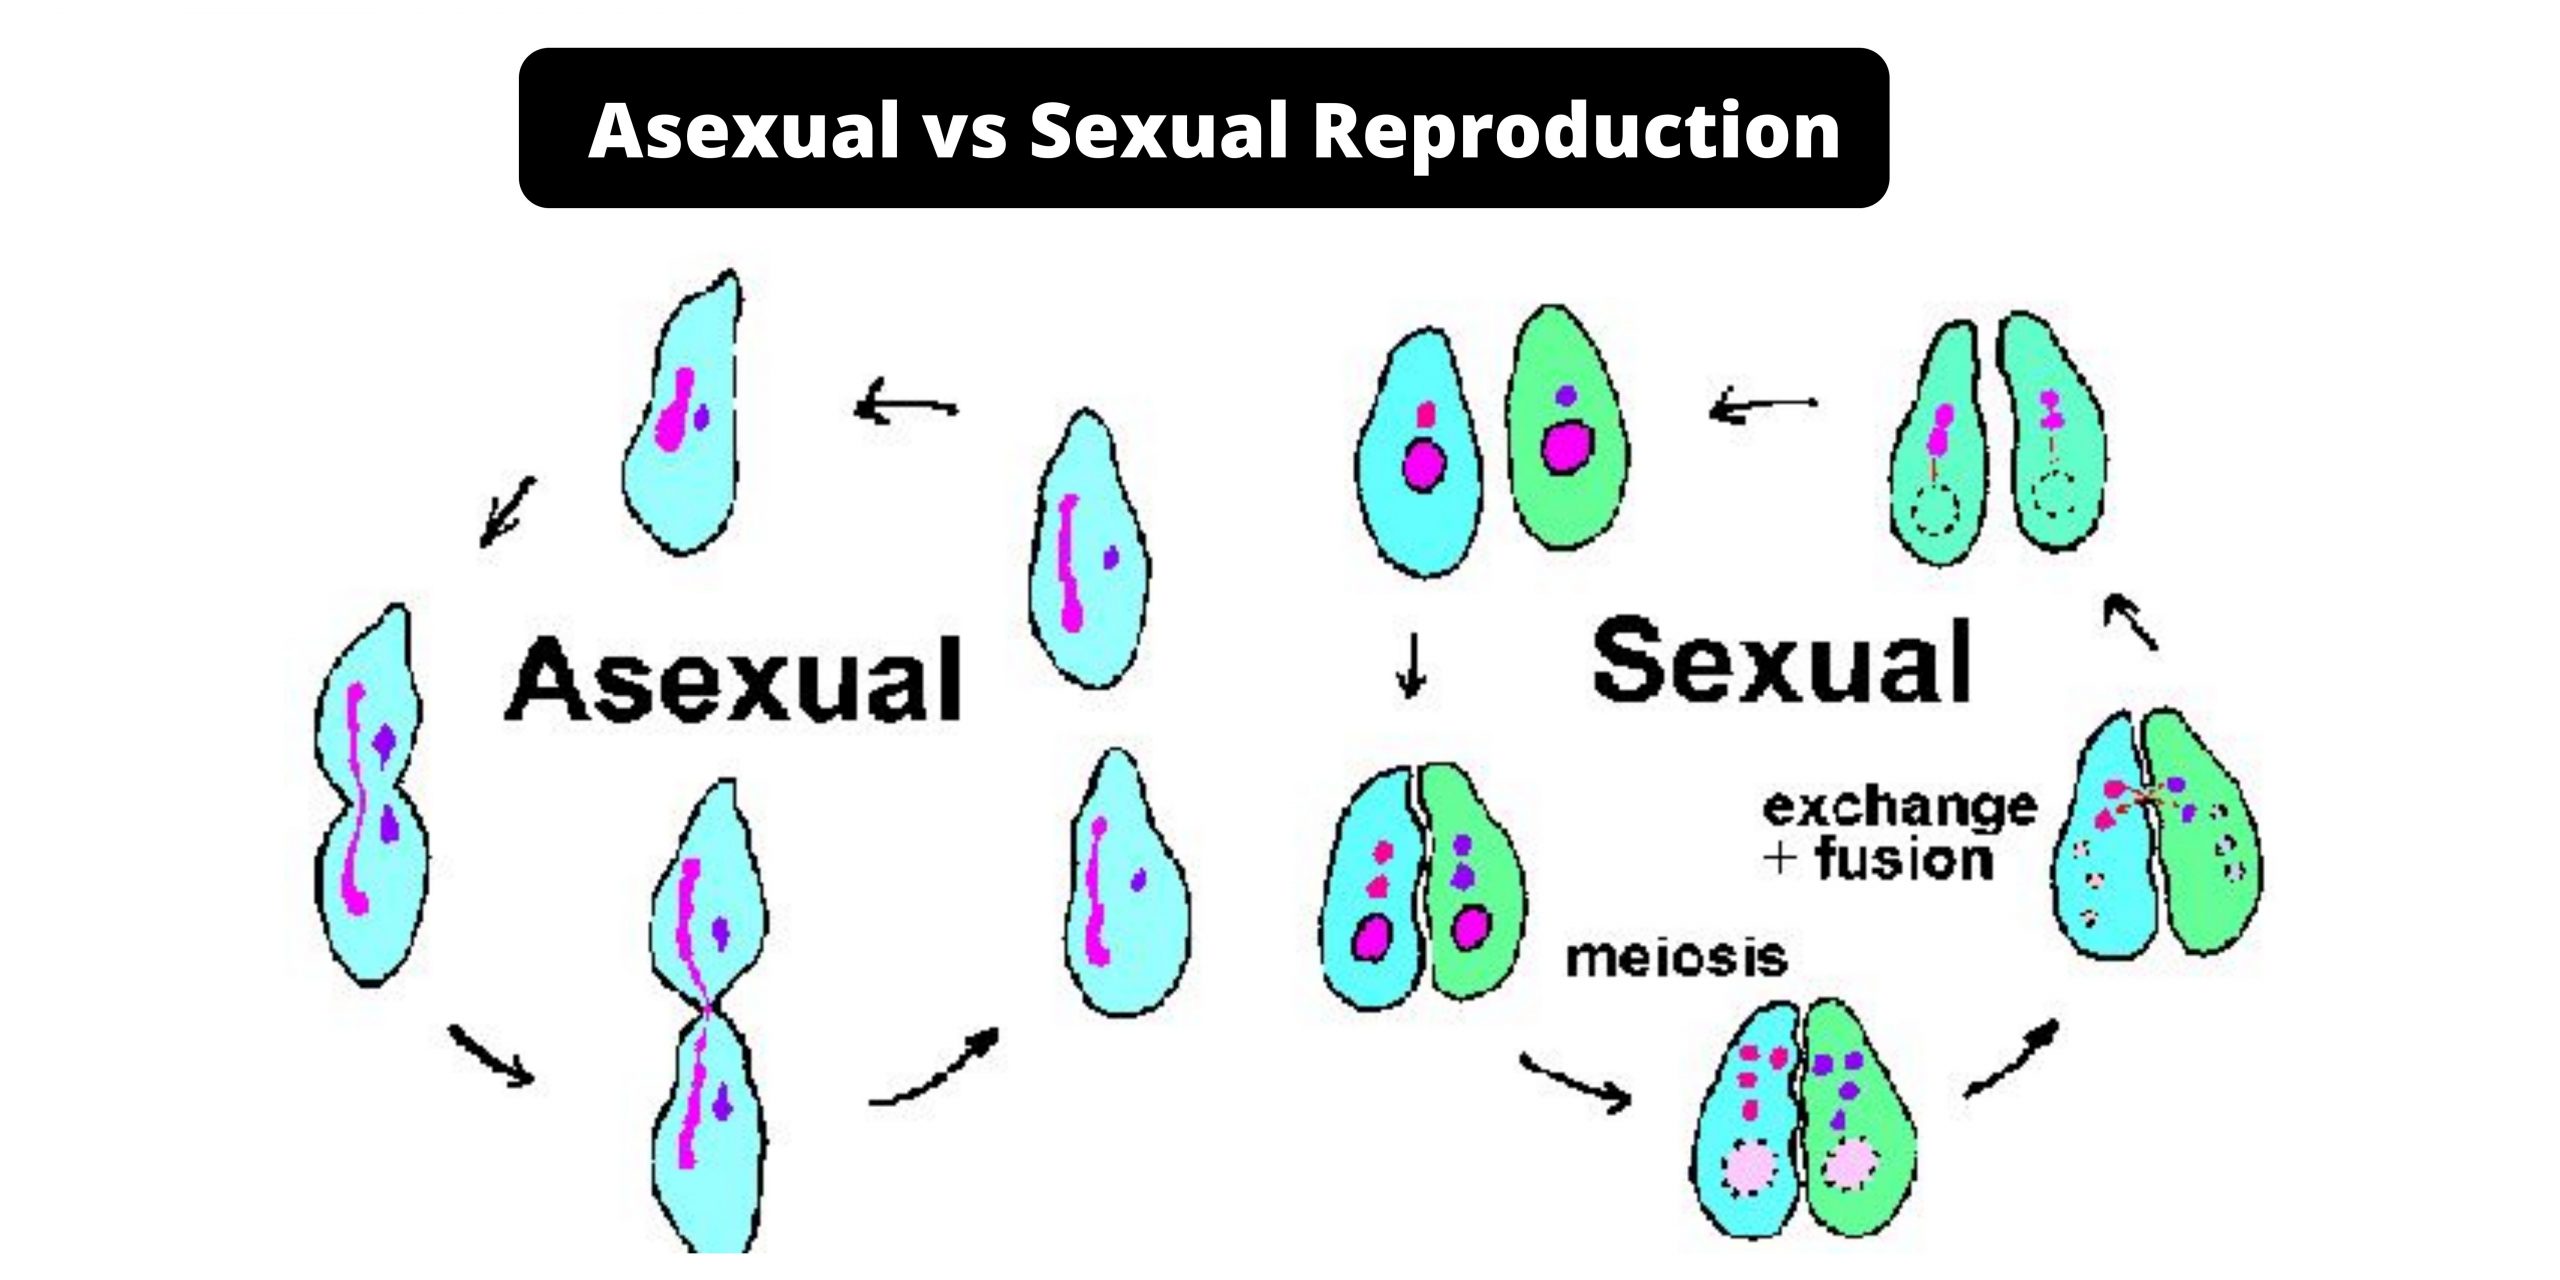 Explain How Asexual Reproduction Like Mitosis Differs From Sexual